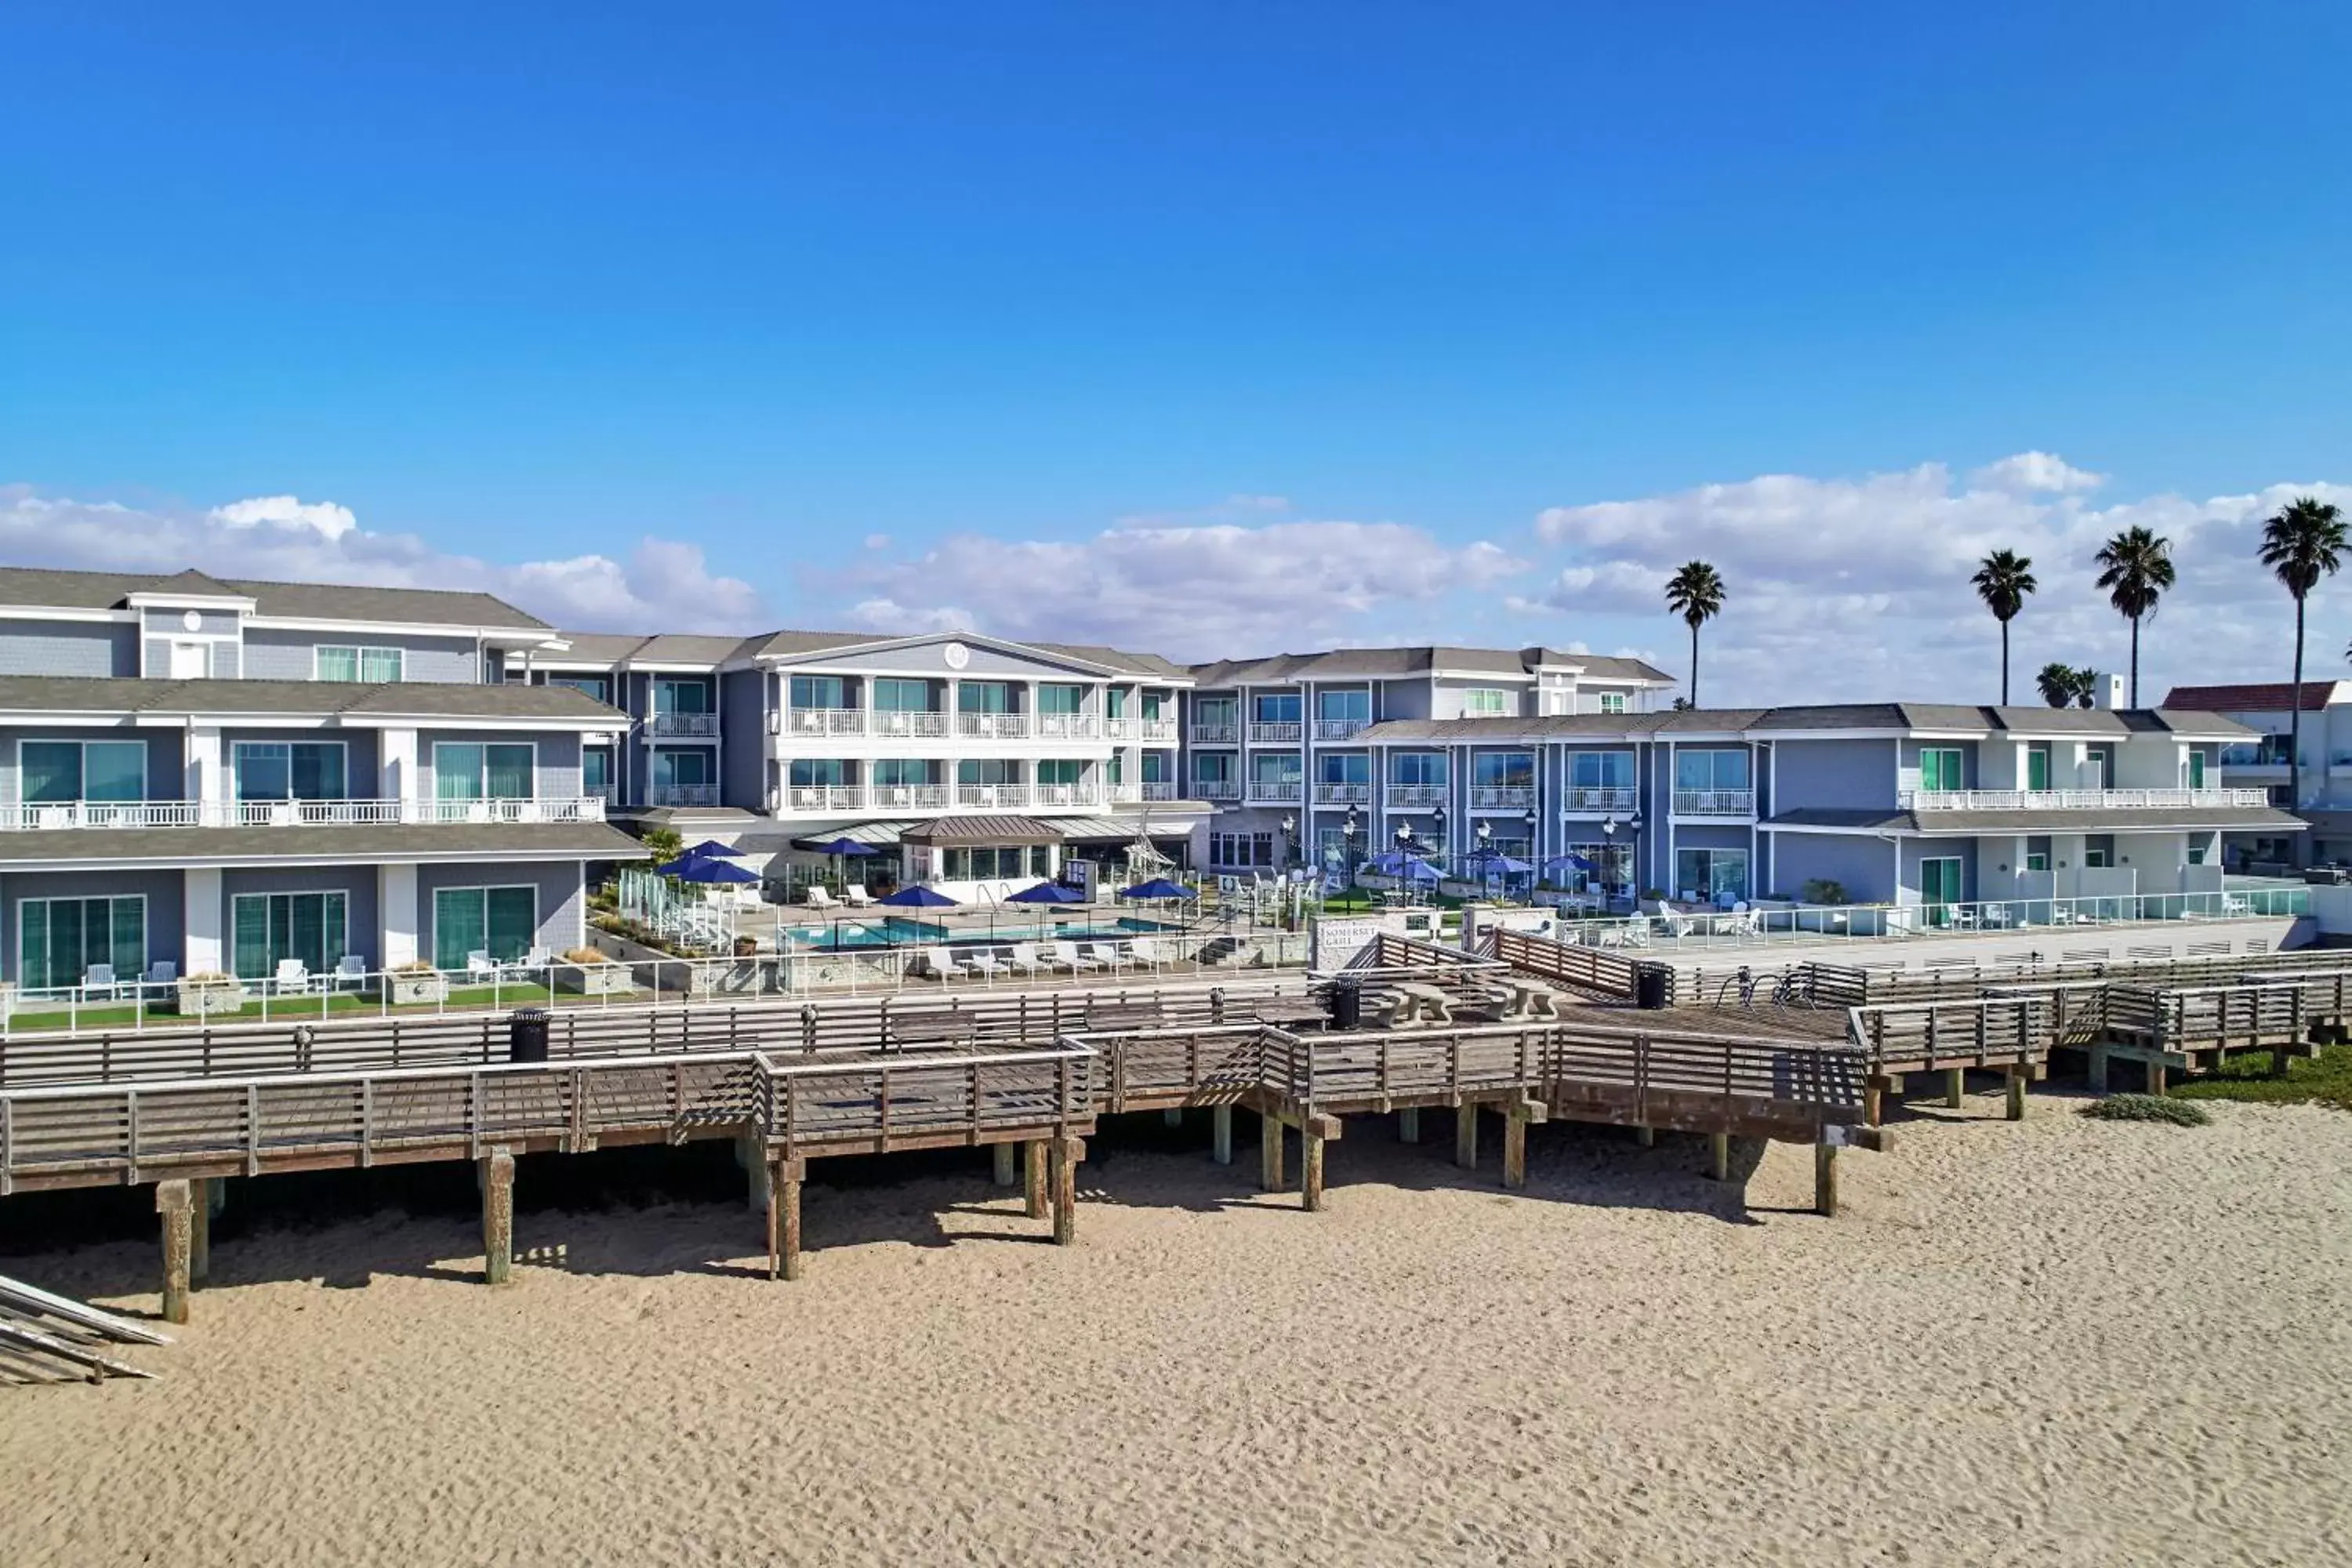 Property building in Vespera Resort on Pismo Beach, Autograph Collection